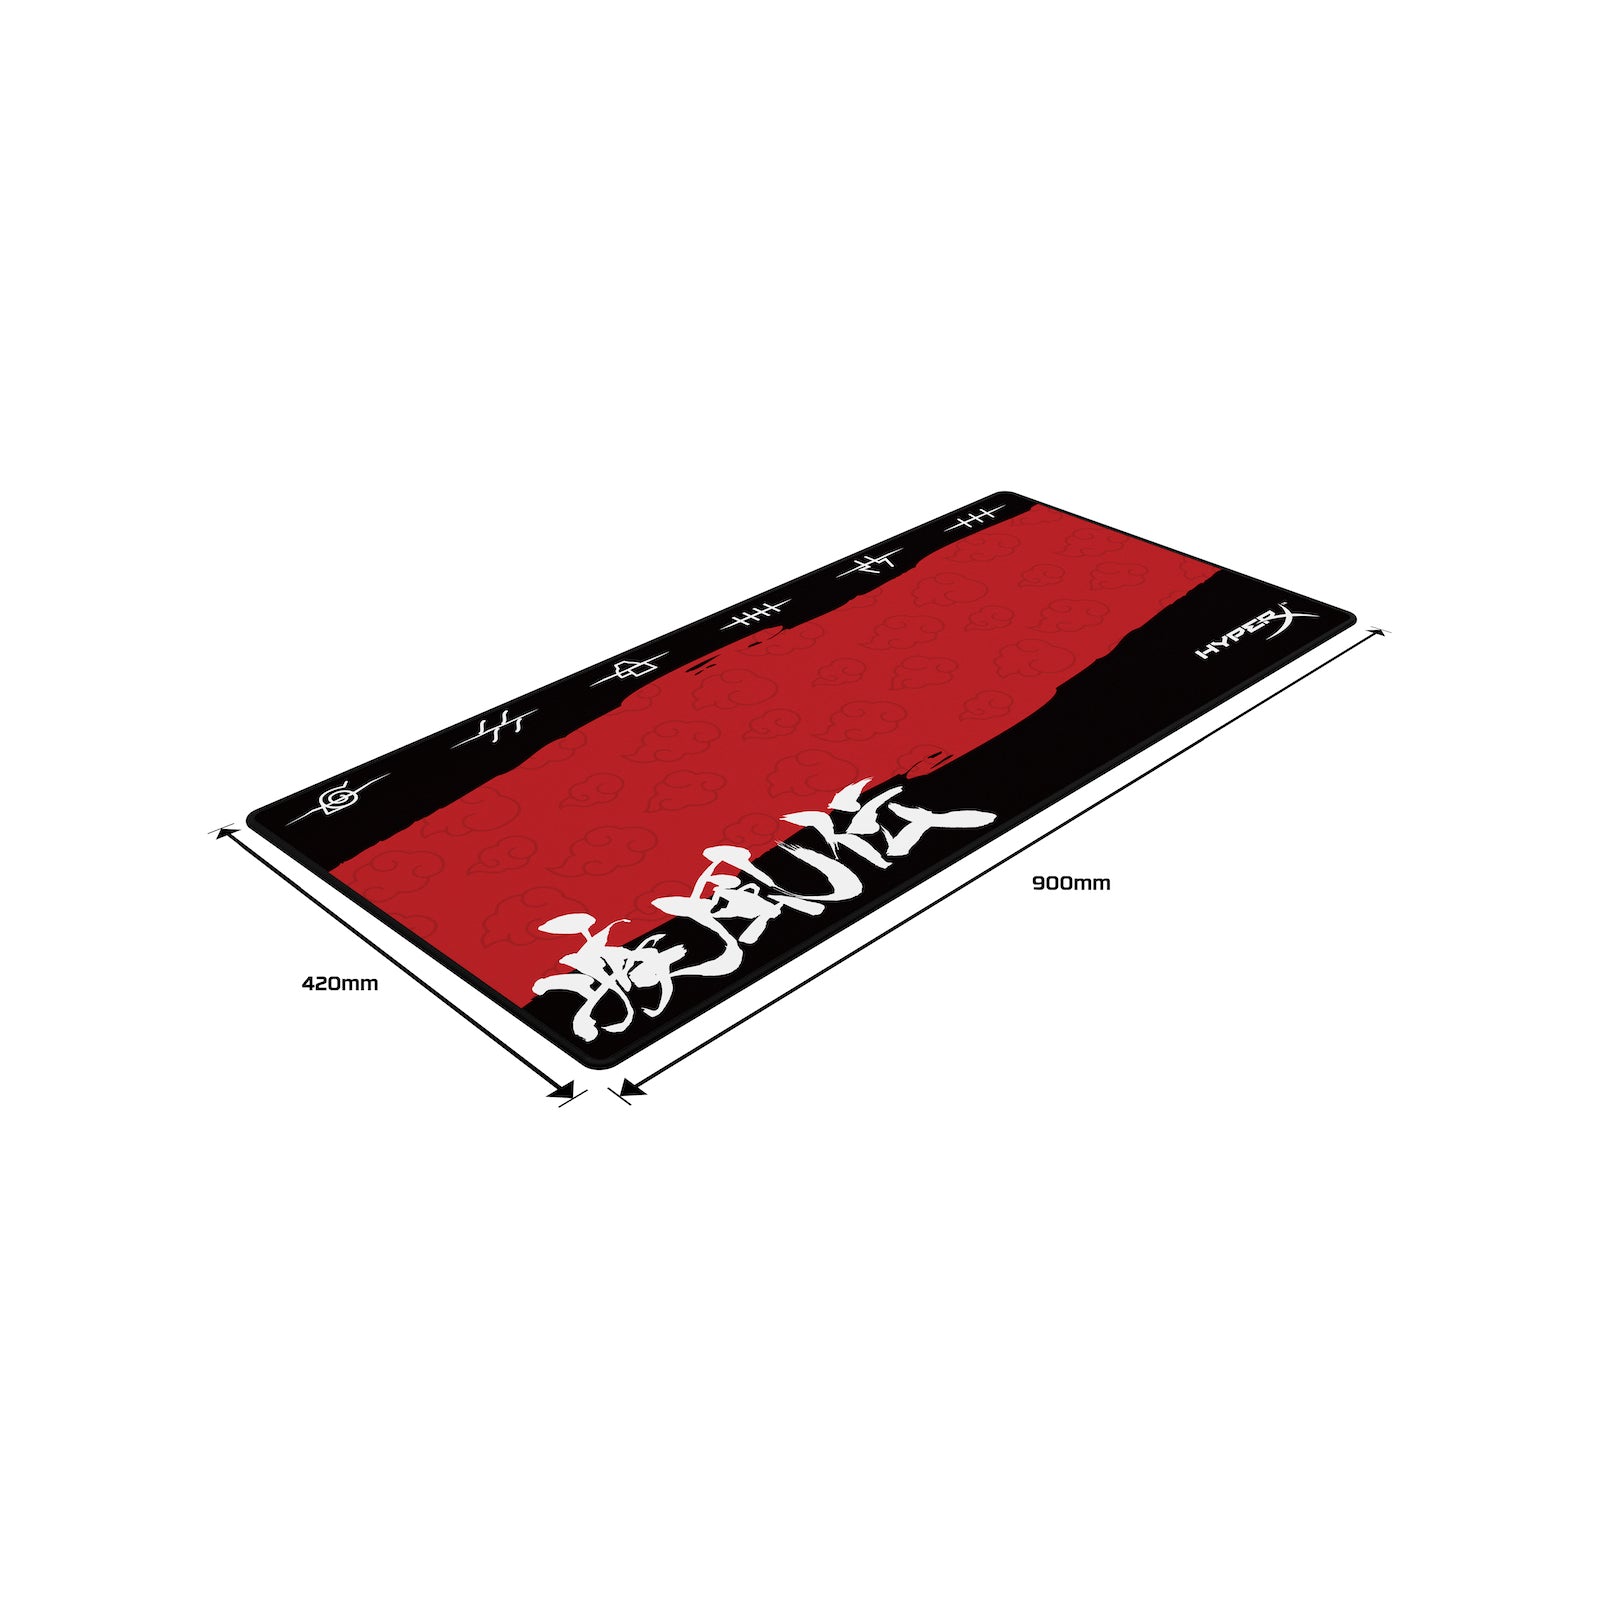 HyperX Pulsefire XL mouse mat Itachi edition left angled view